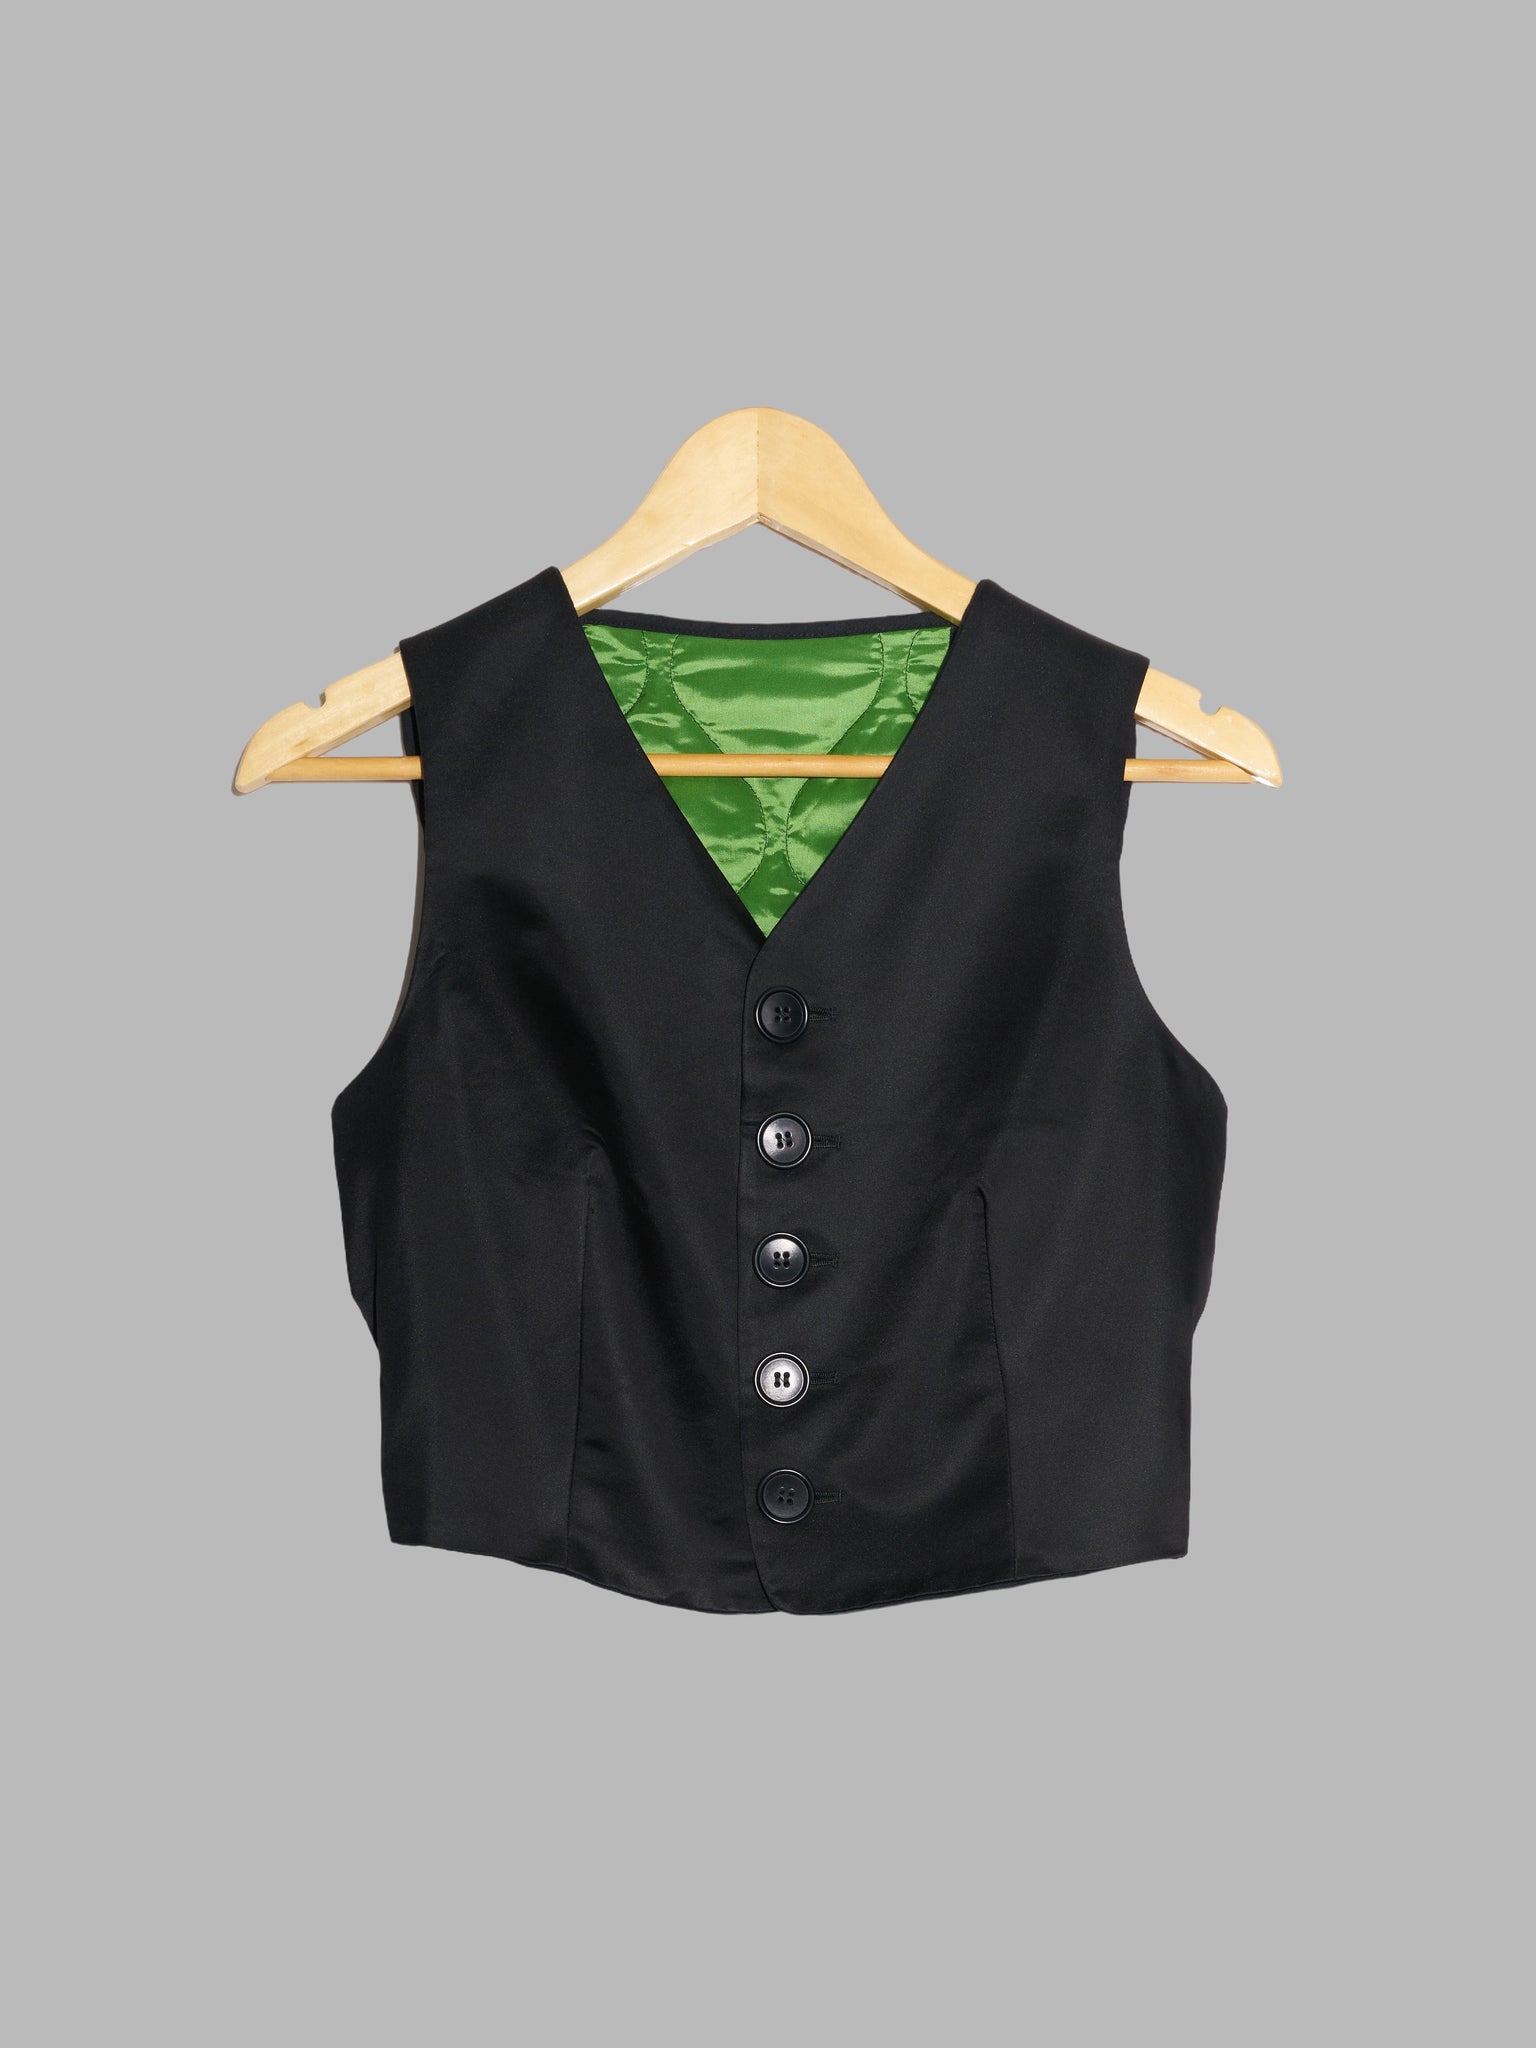 Dirk Bikkembergs 1990s quilted black satin waistcoat with green reversible back